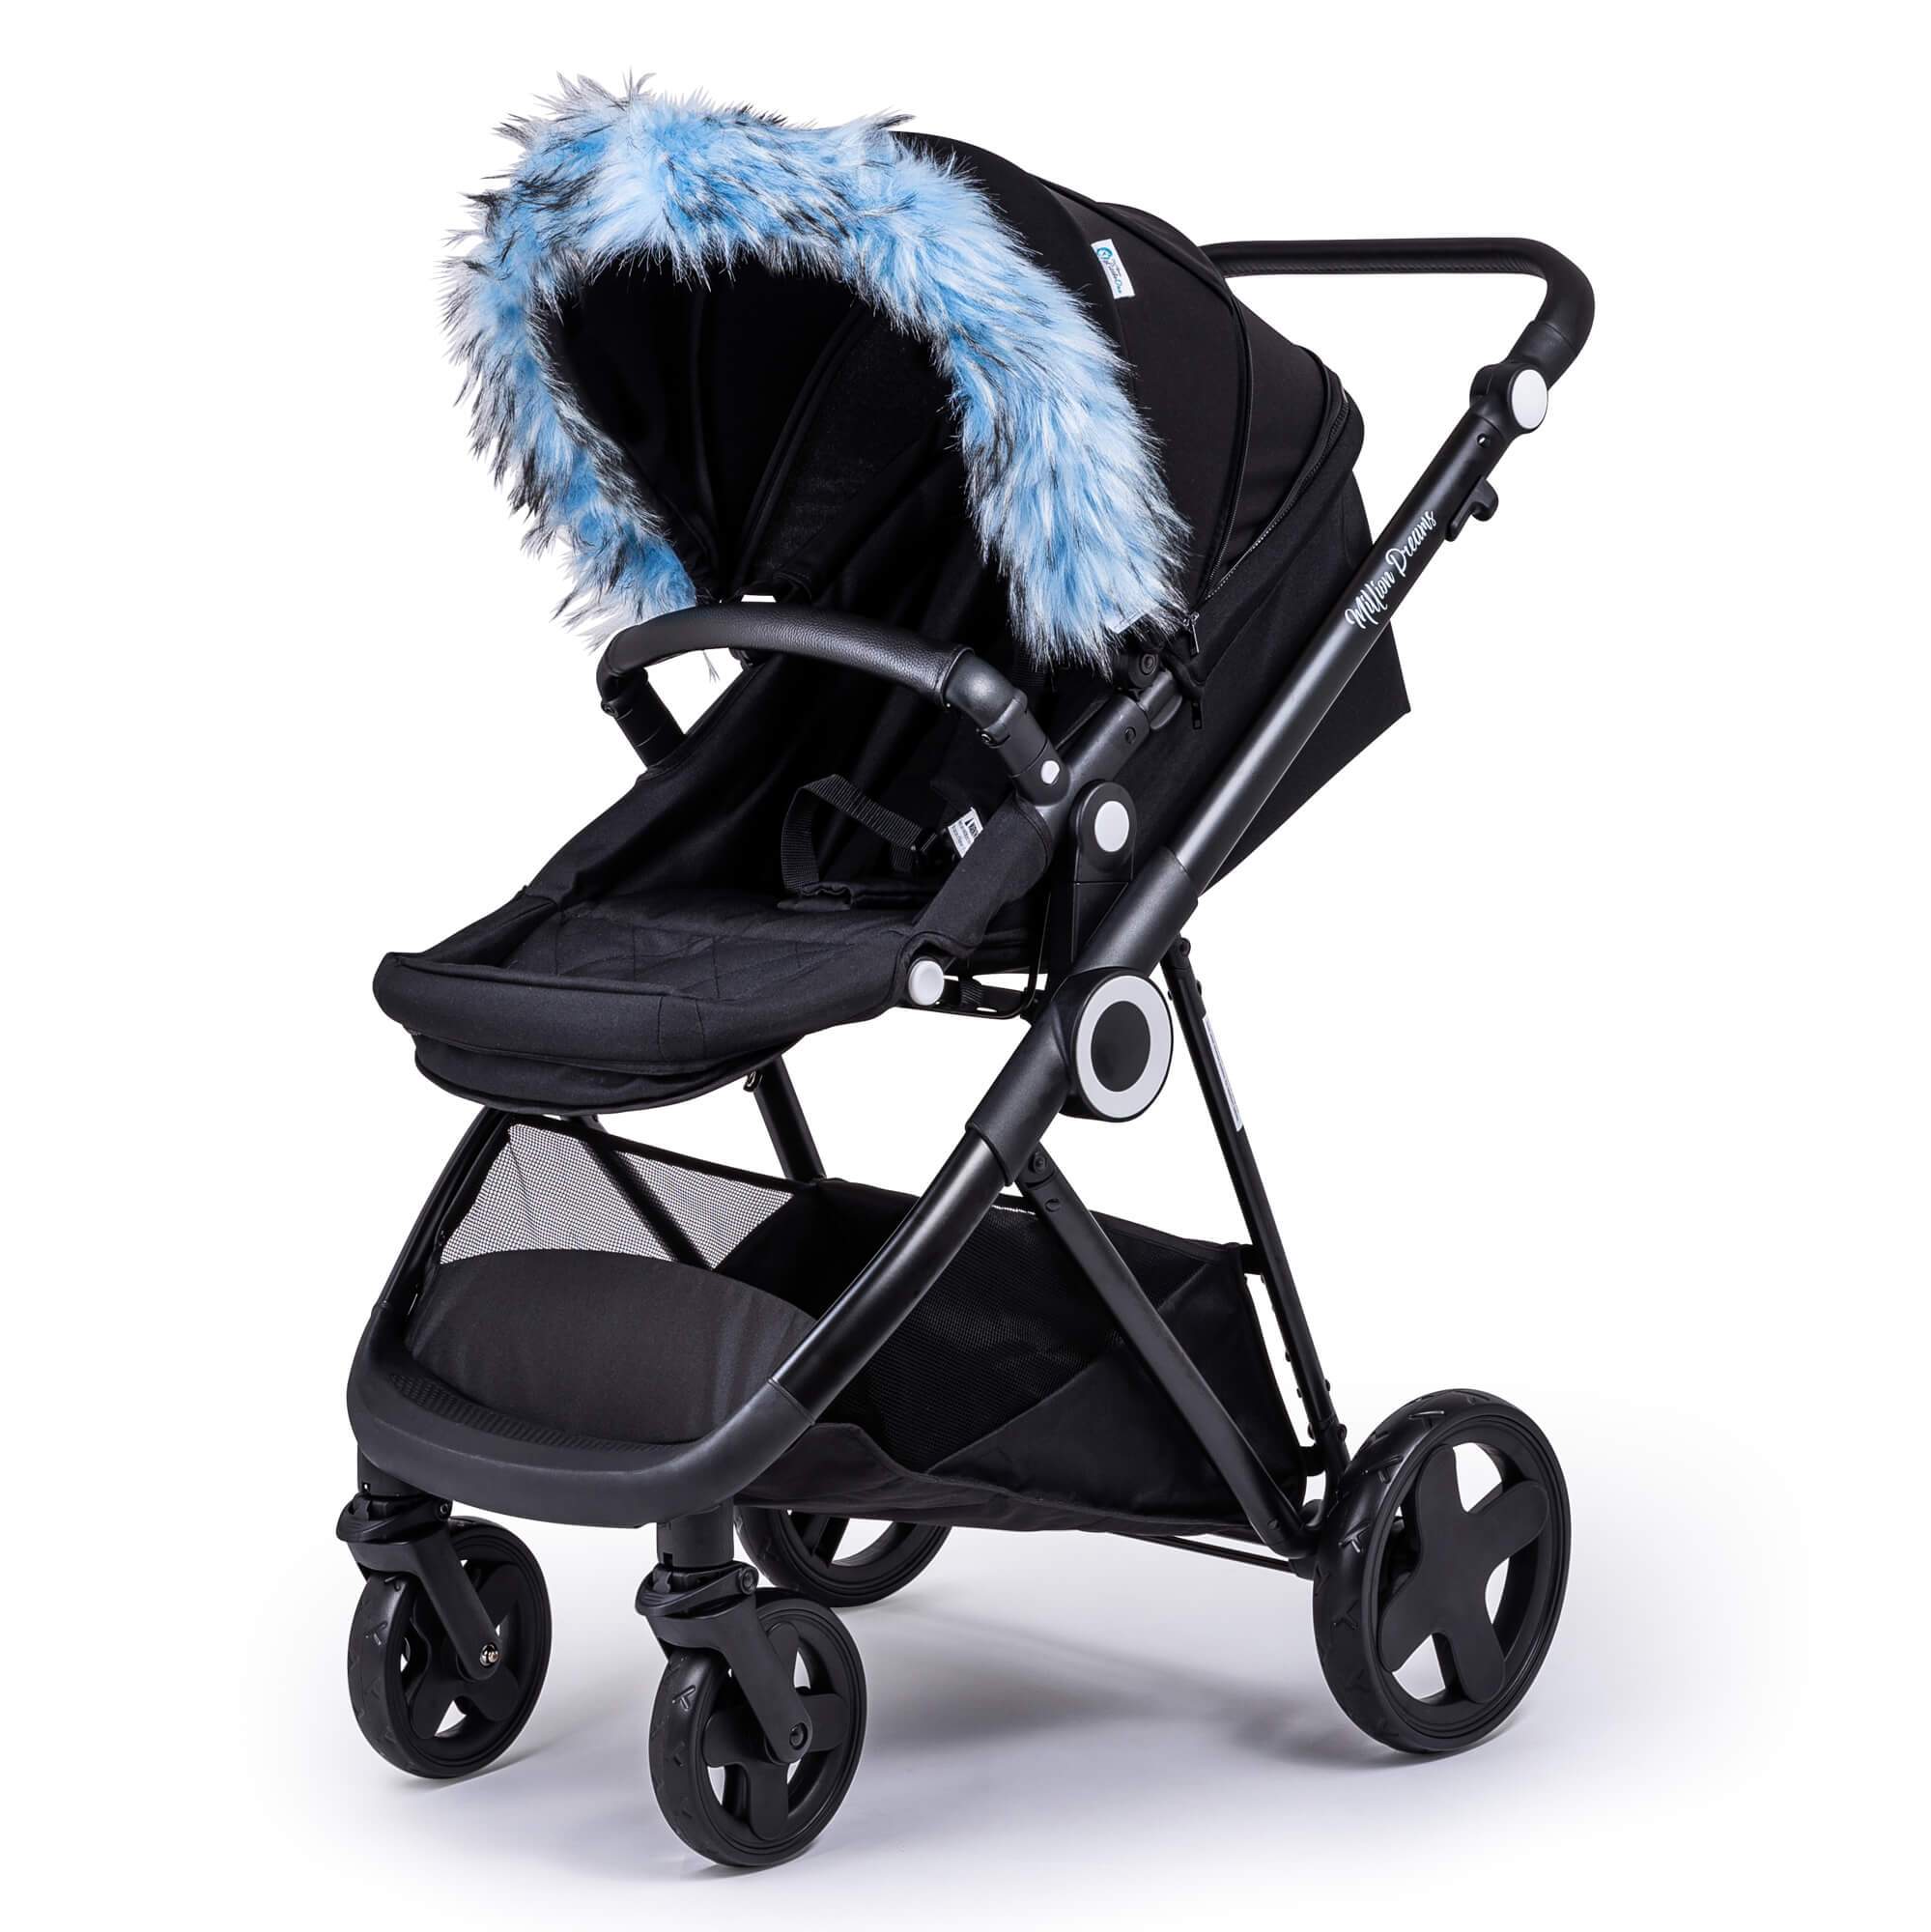 Pram Fur Hood Trim Attachment for Pushchair Compatible with Noukies - Light Blue / Fits All Models | For Your Little One